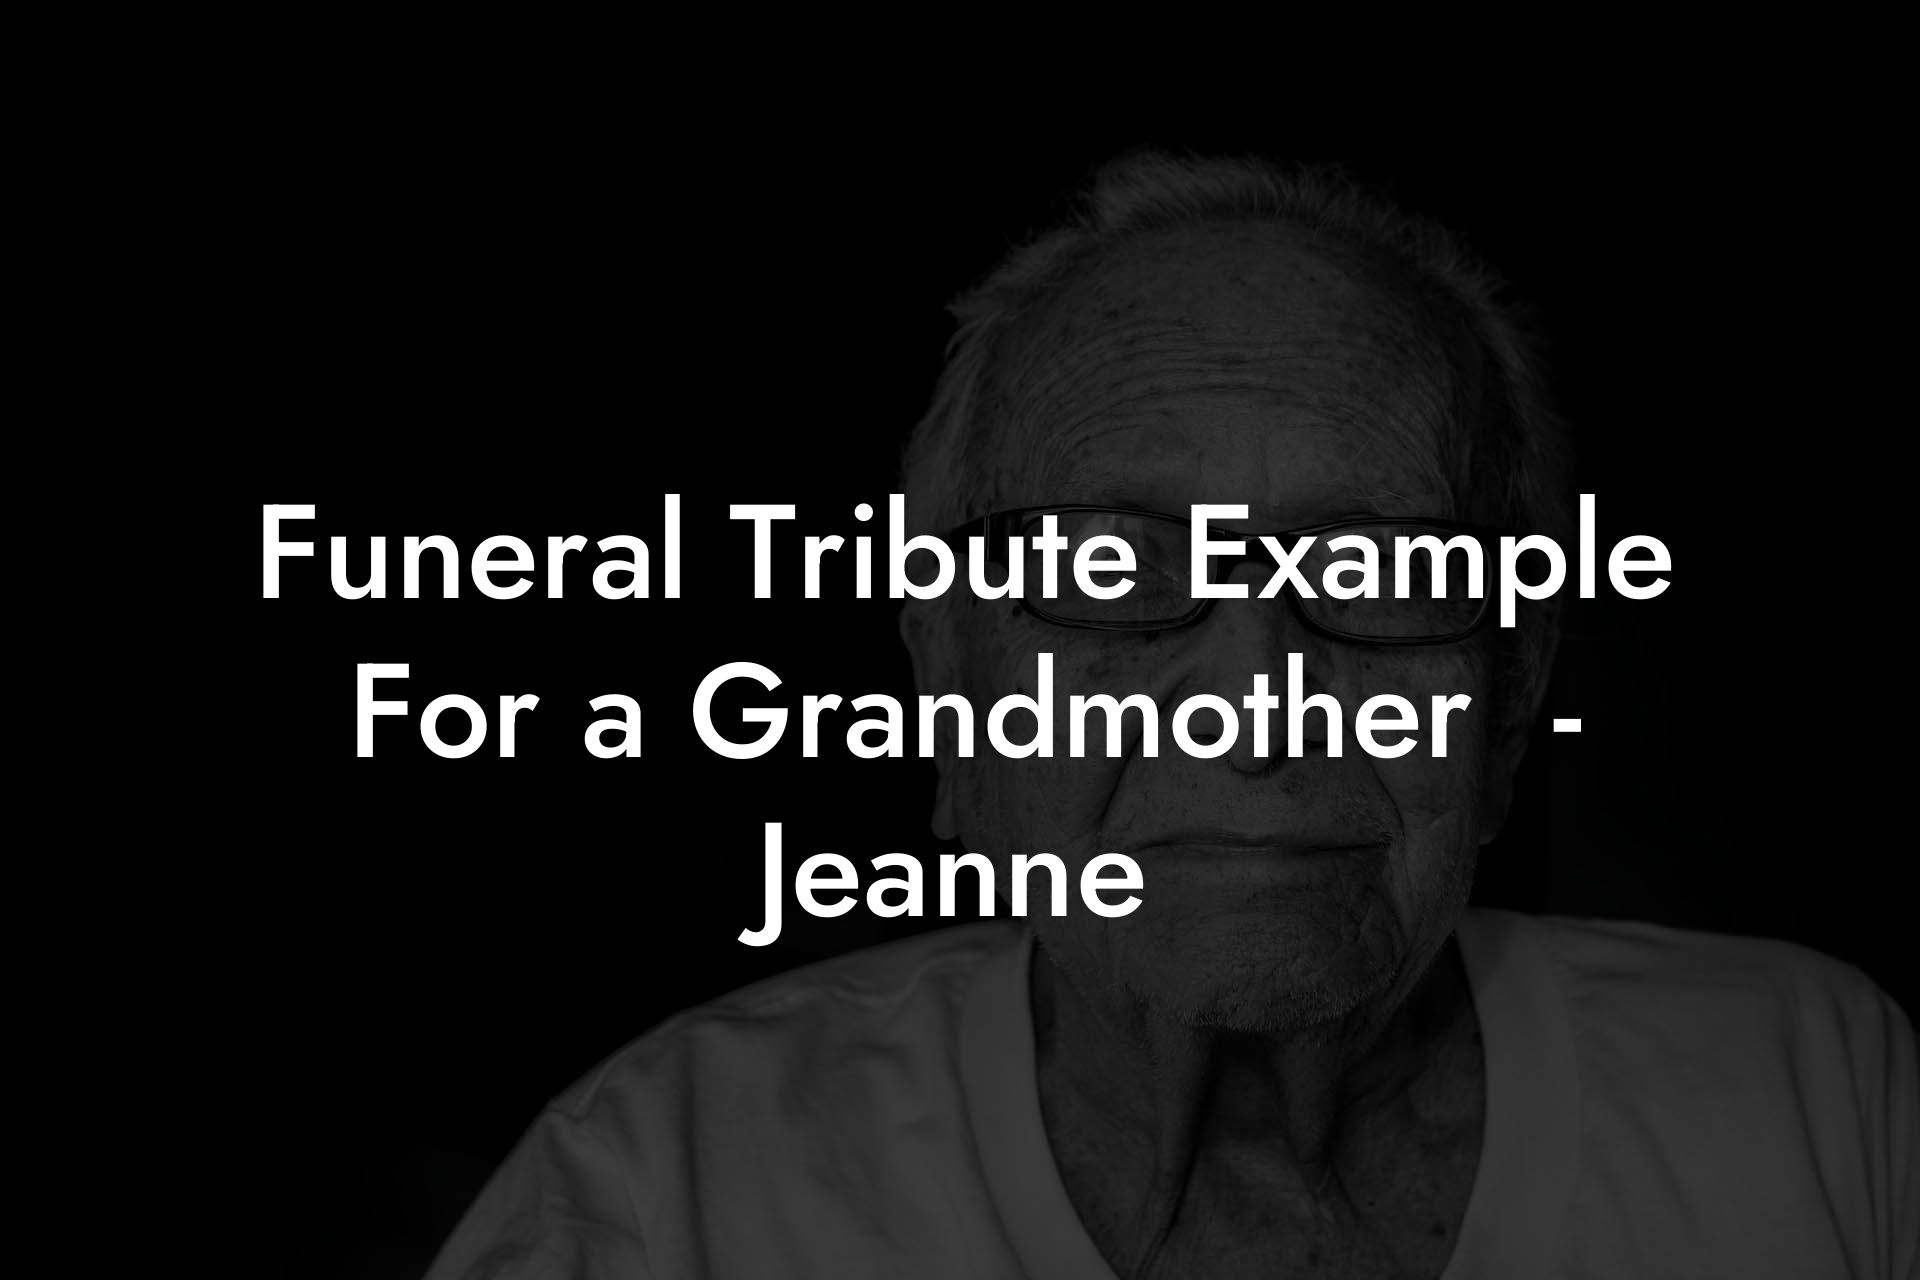 Funeral Tribute Example For a Grandmother  - Jeanne